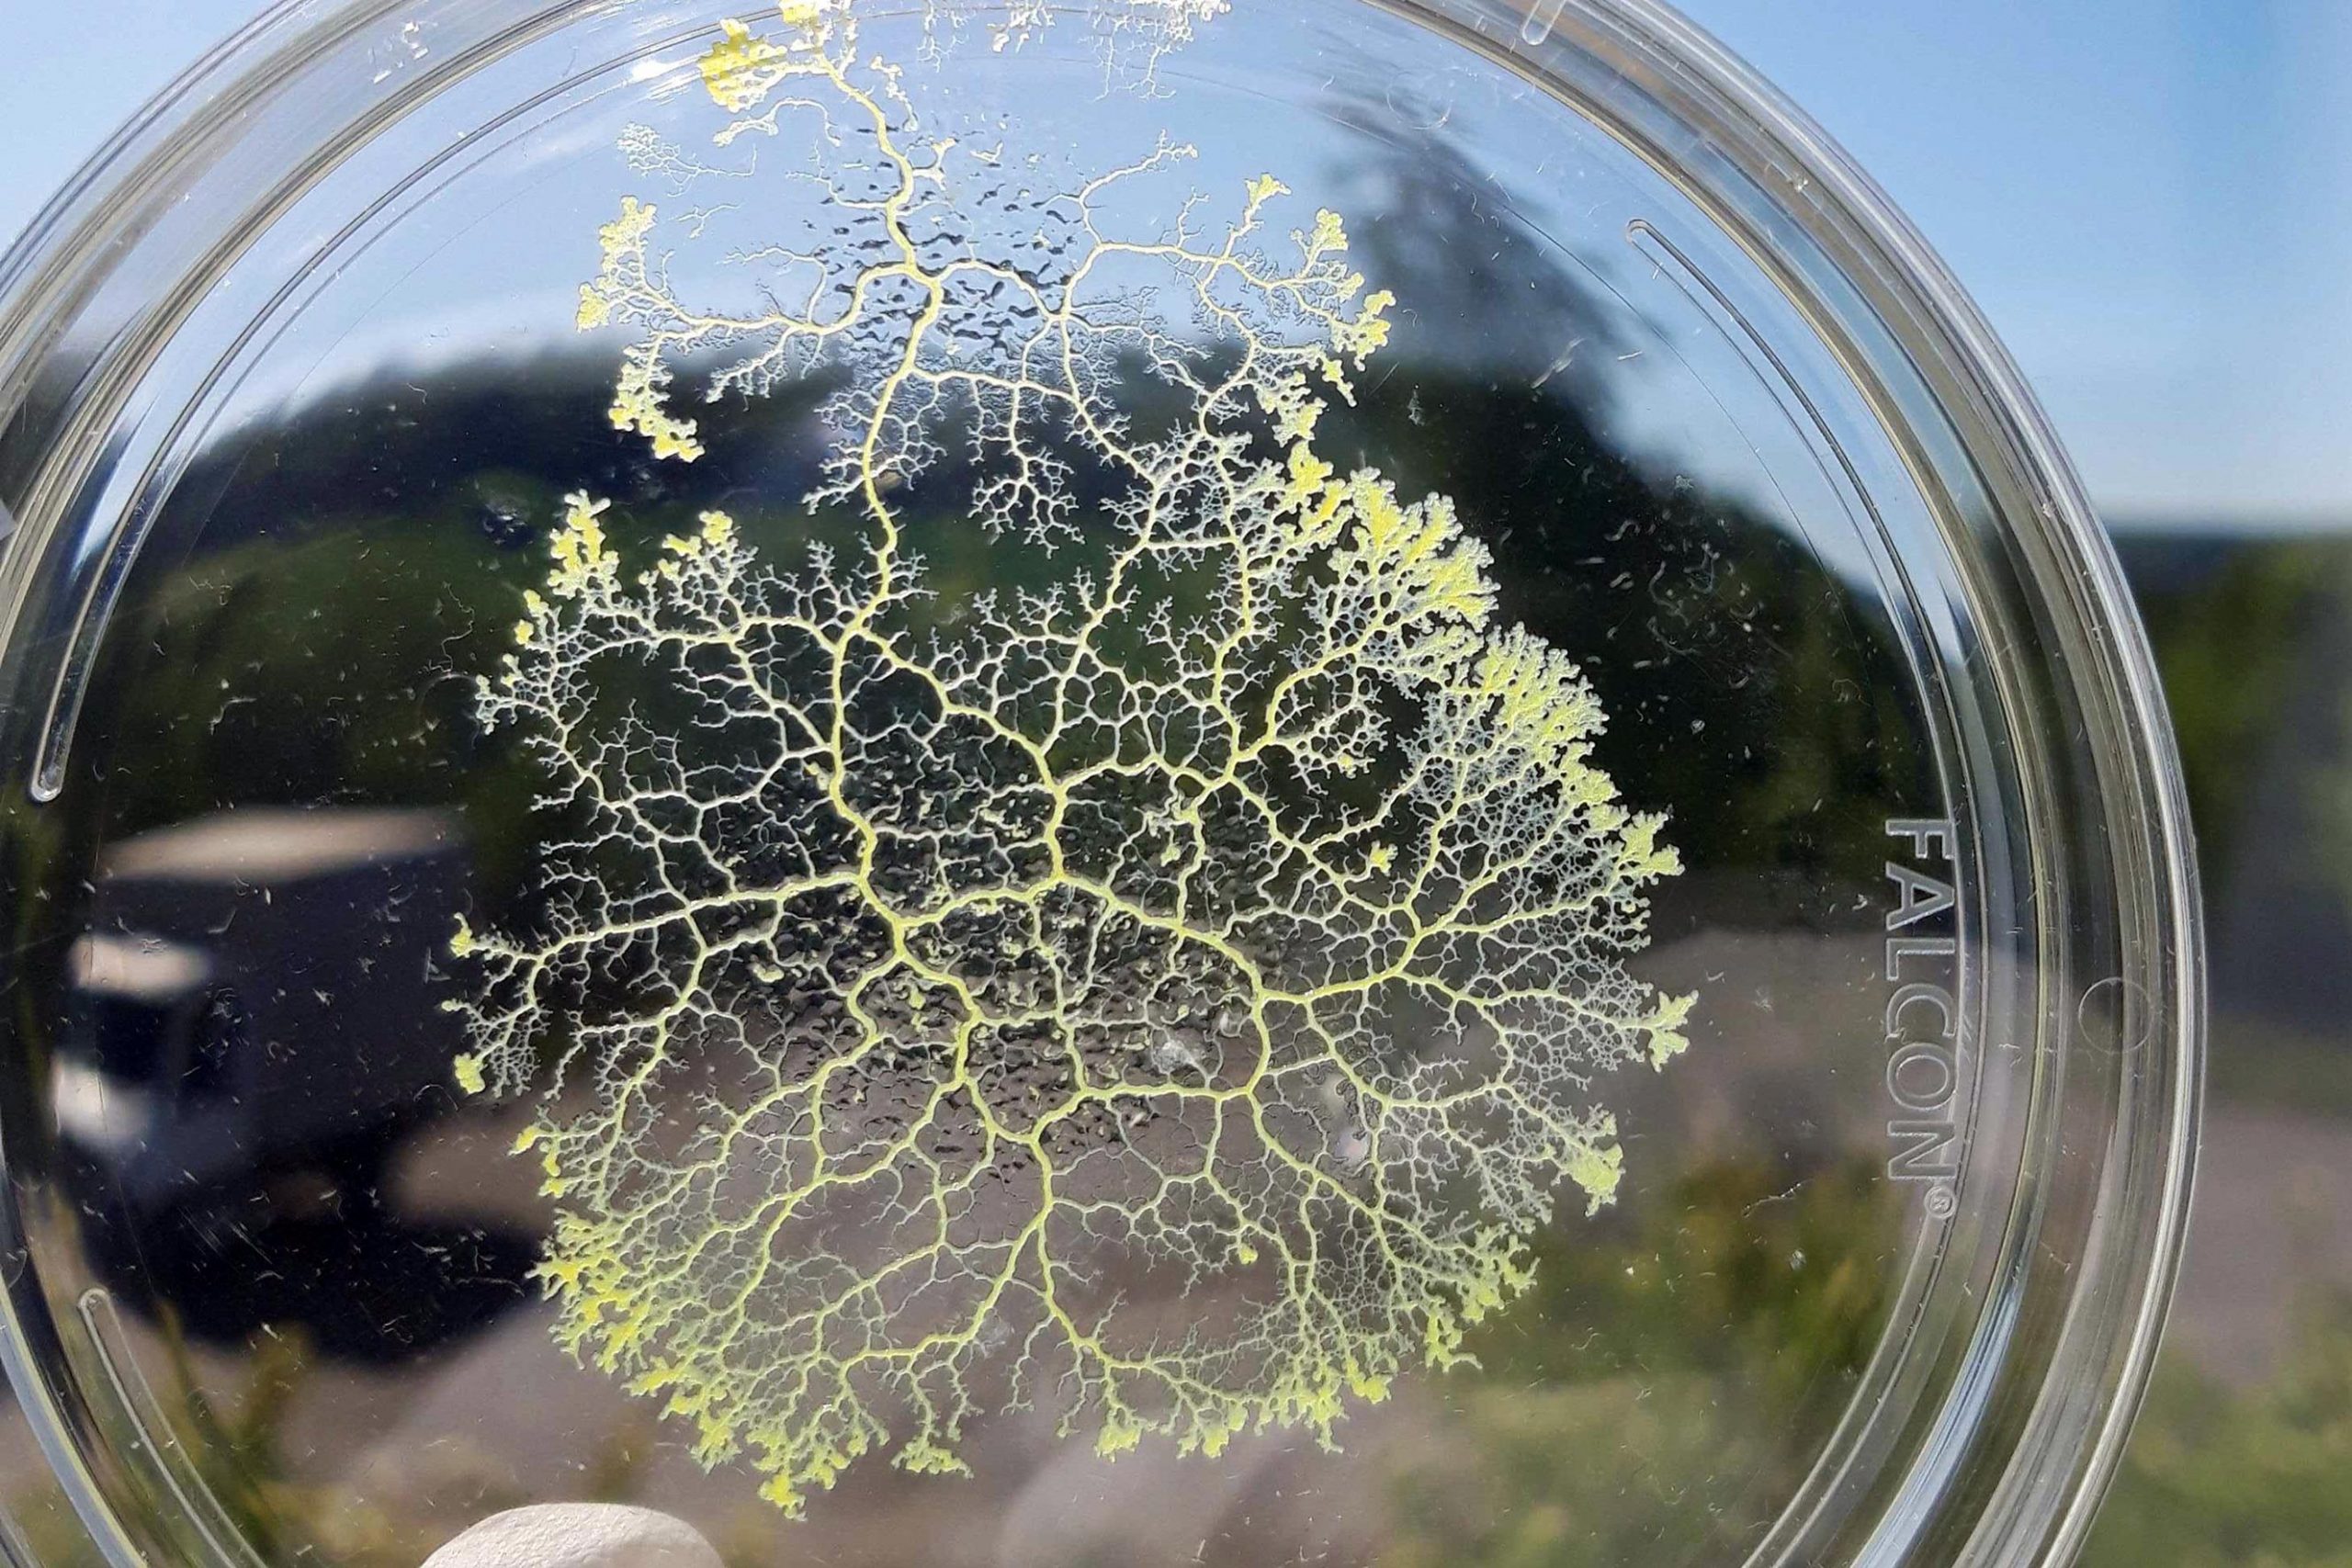 How a single slime mold makes smart decisions